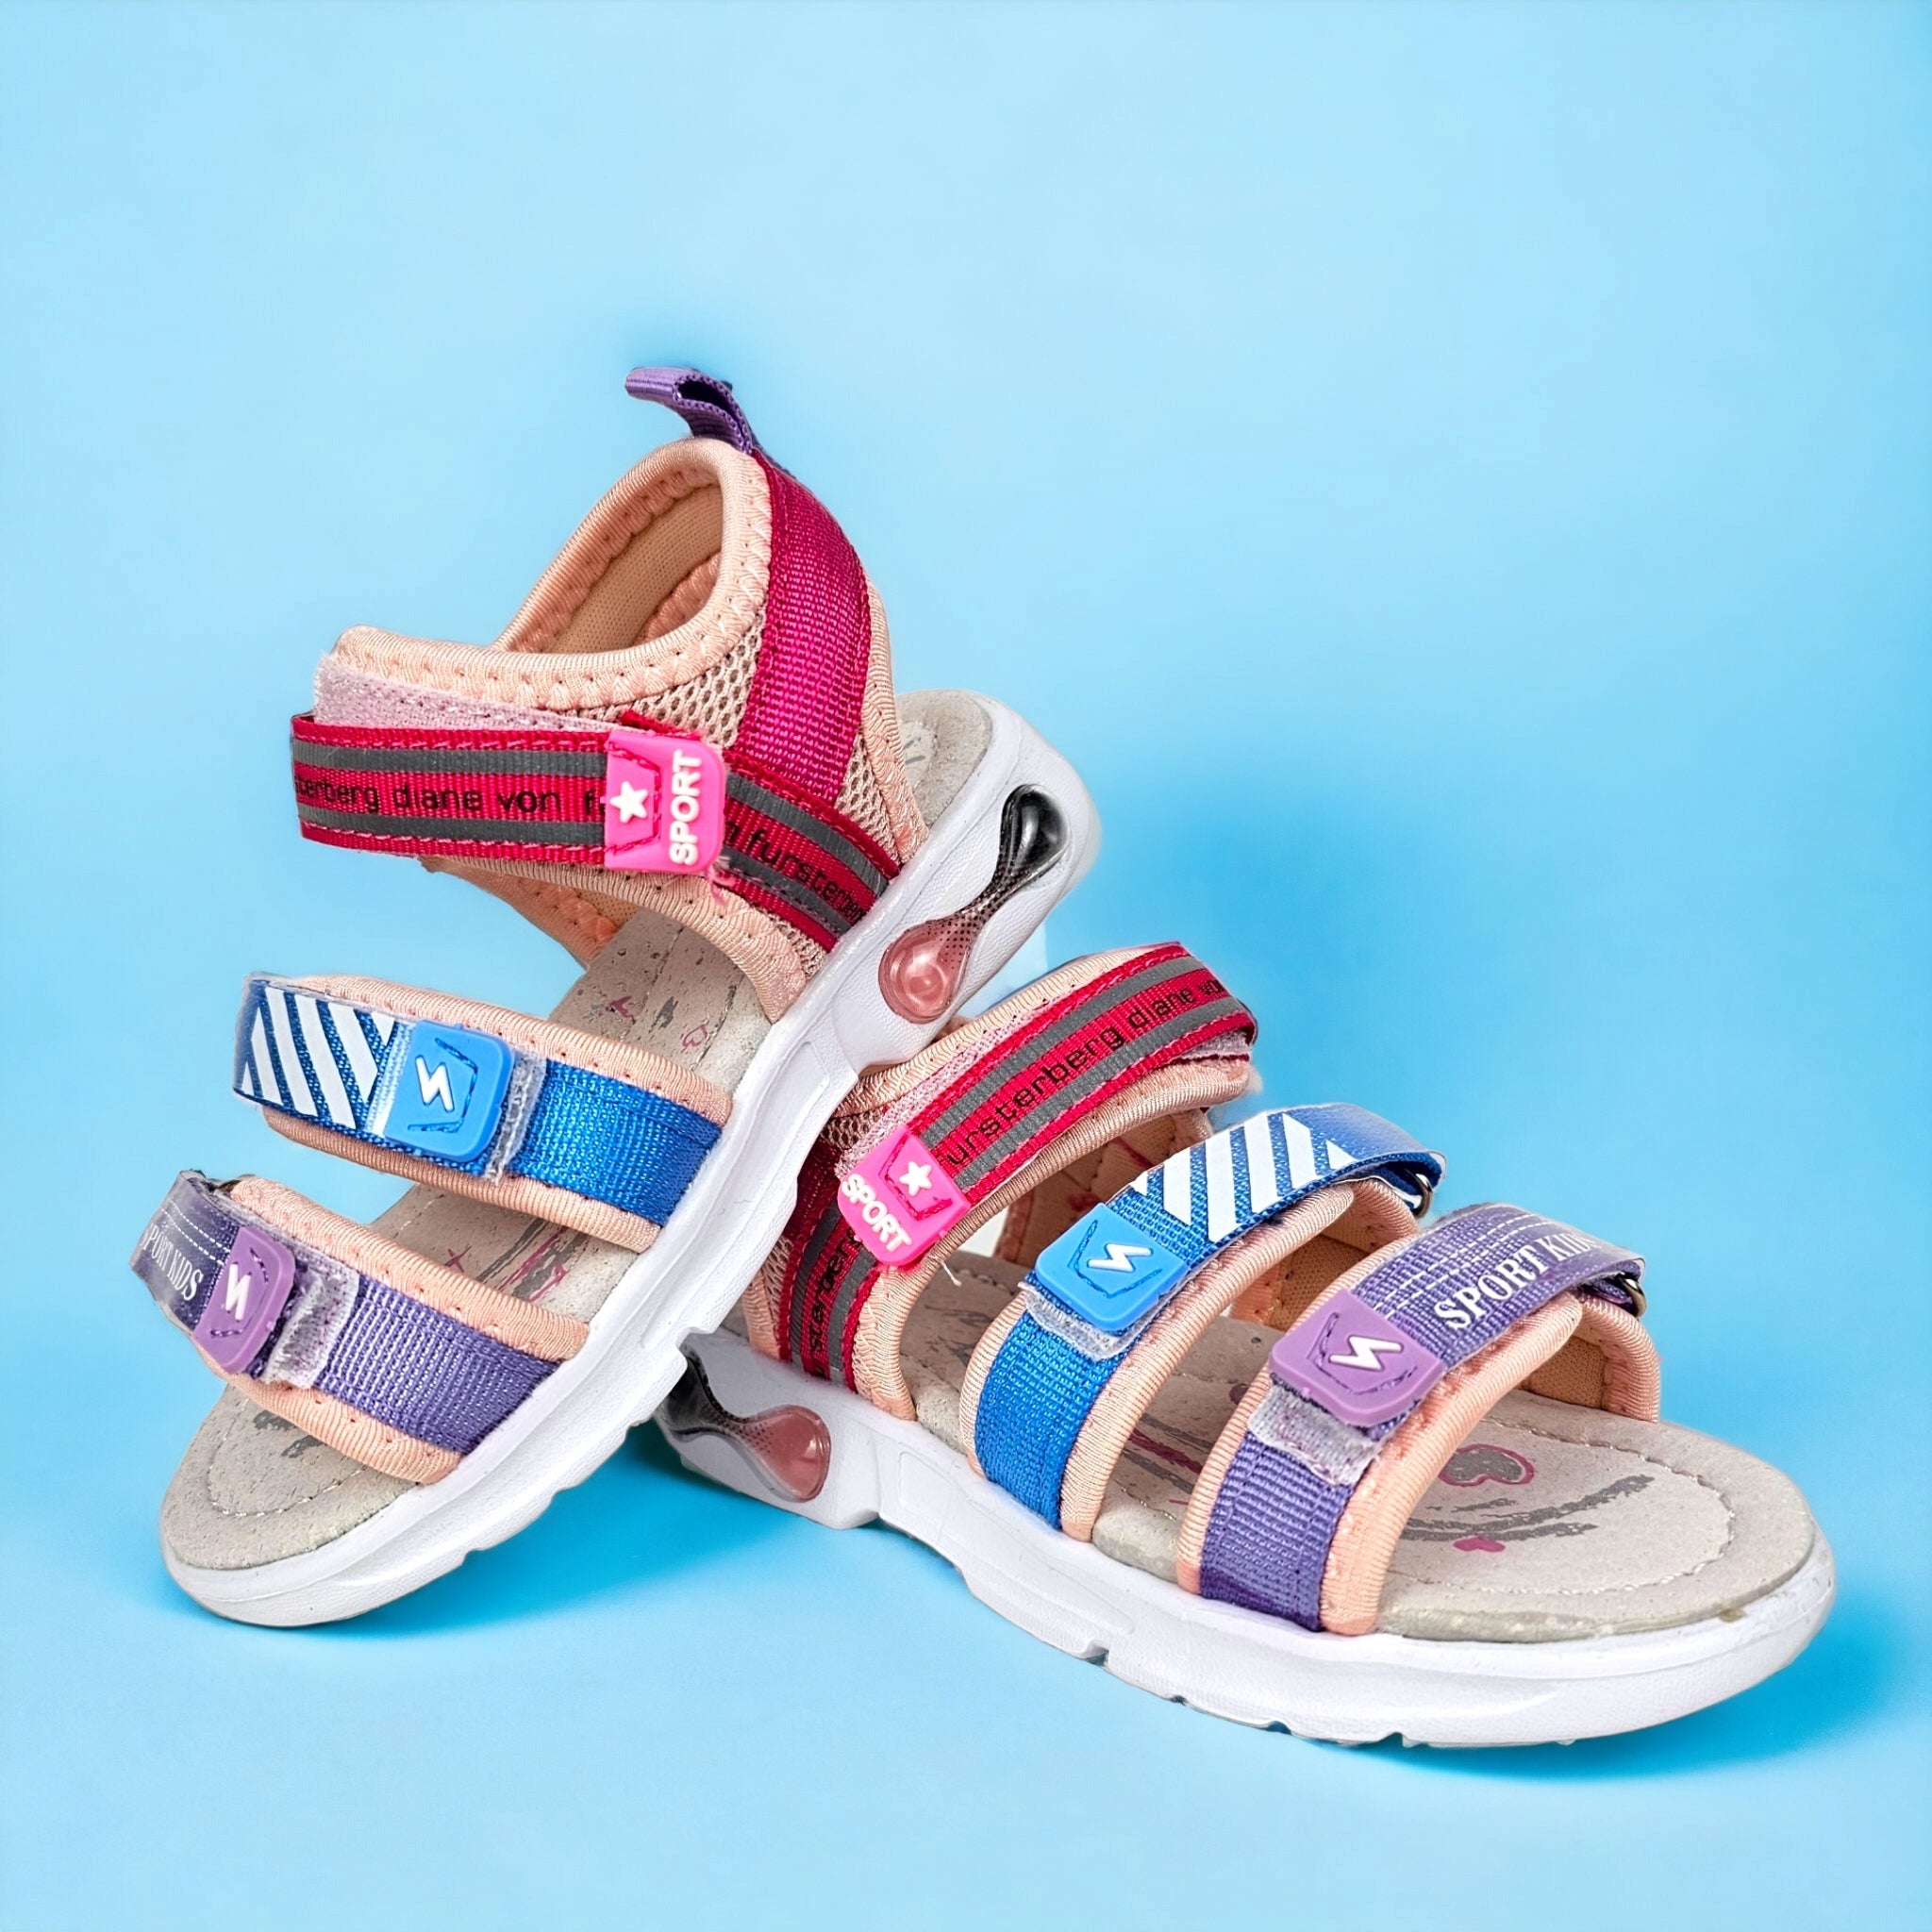 Kids Sandals Marvel  Violet Pink Made of Textile Material and Natural Leather